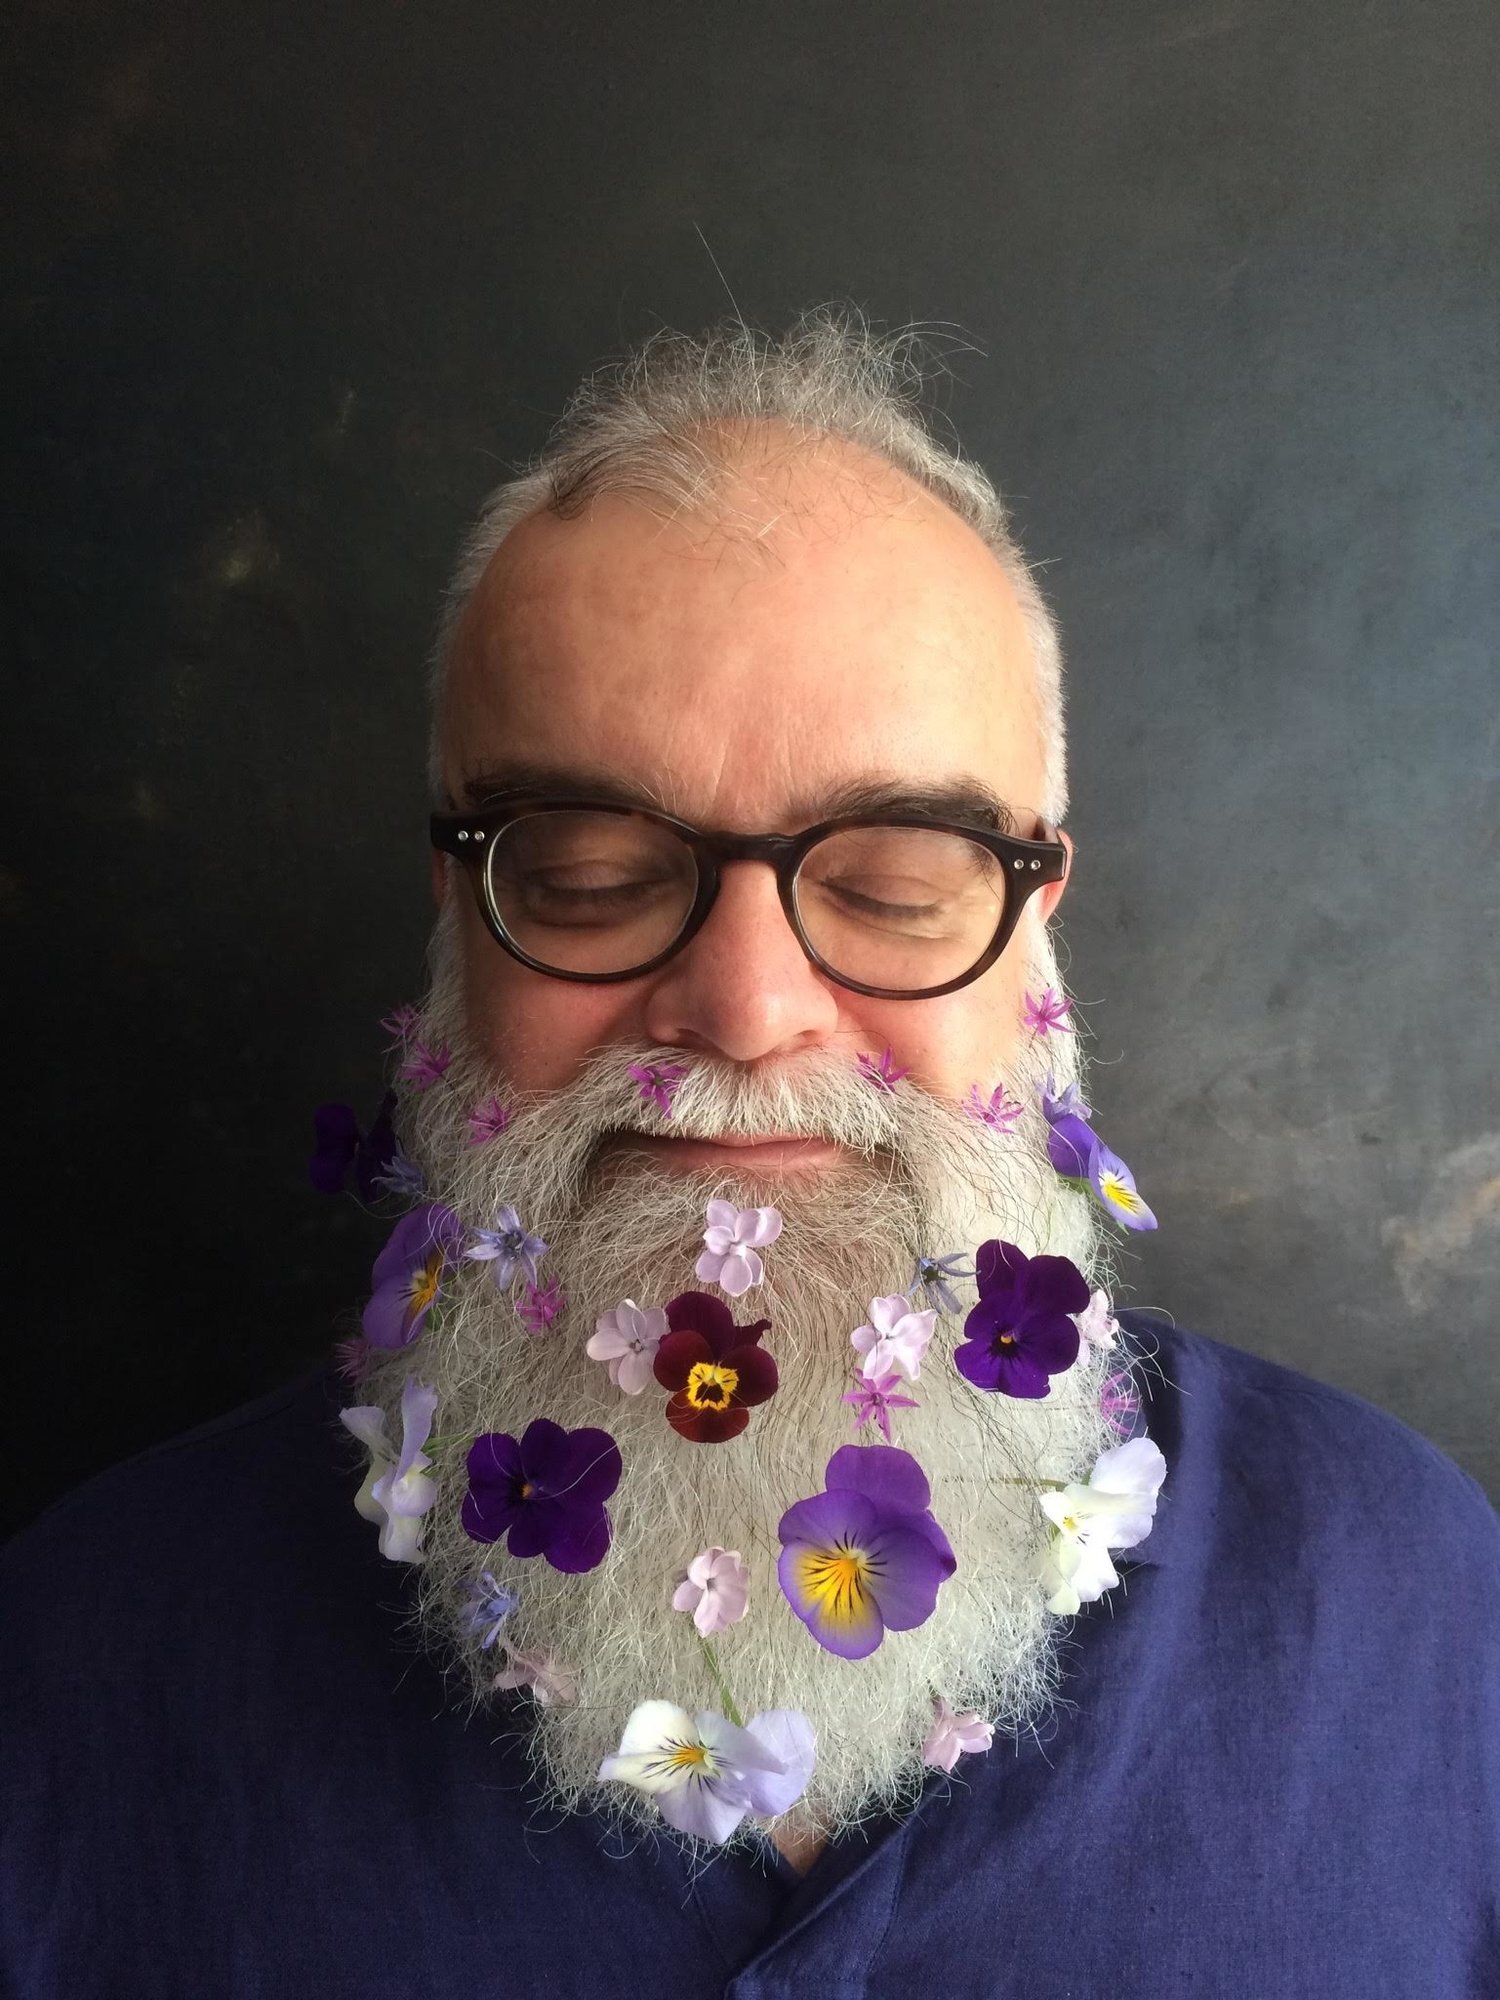 A portrait of composer Rodney Sharman shows him wearing thick-rimmed glasses and sporting a long grey beard with purple flowers in it.